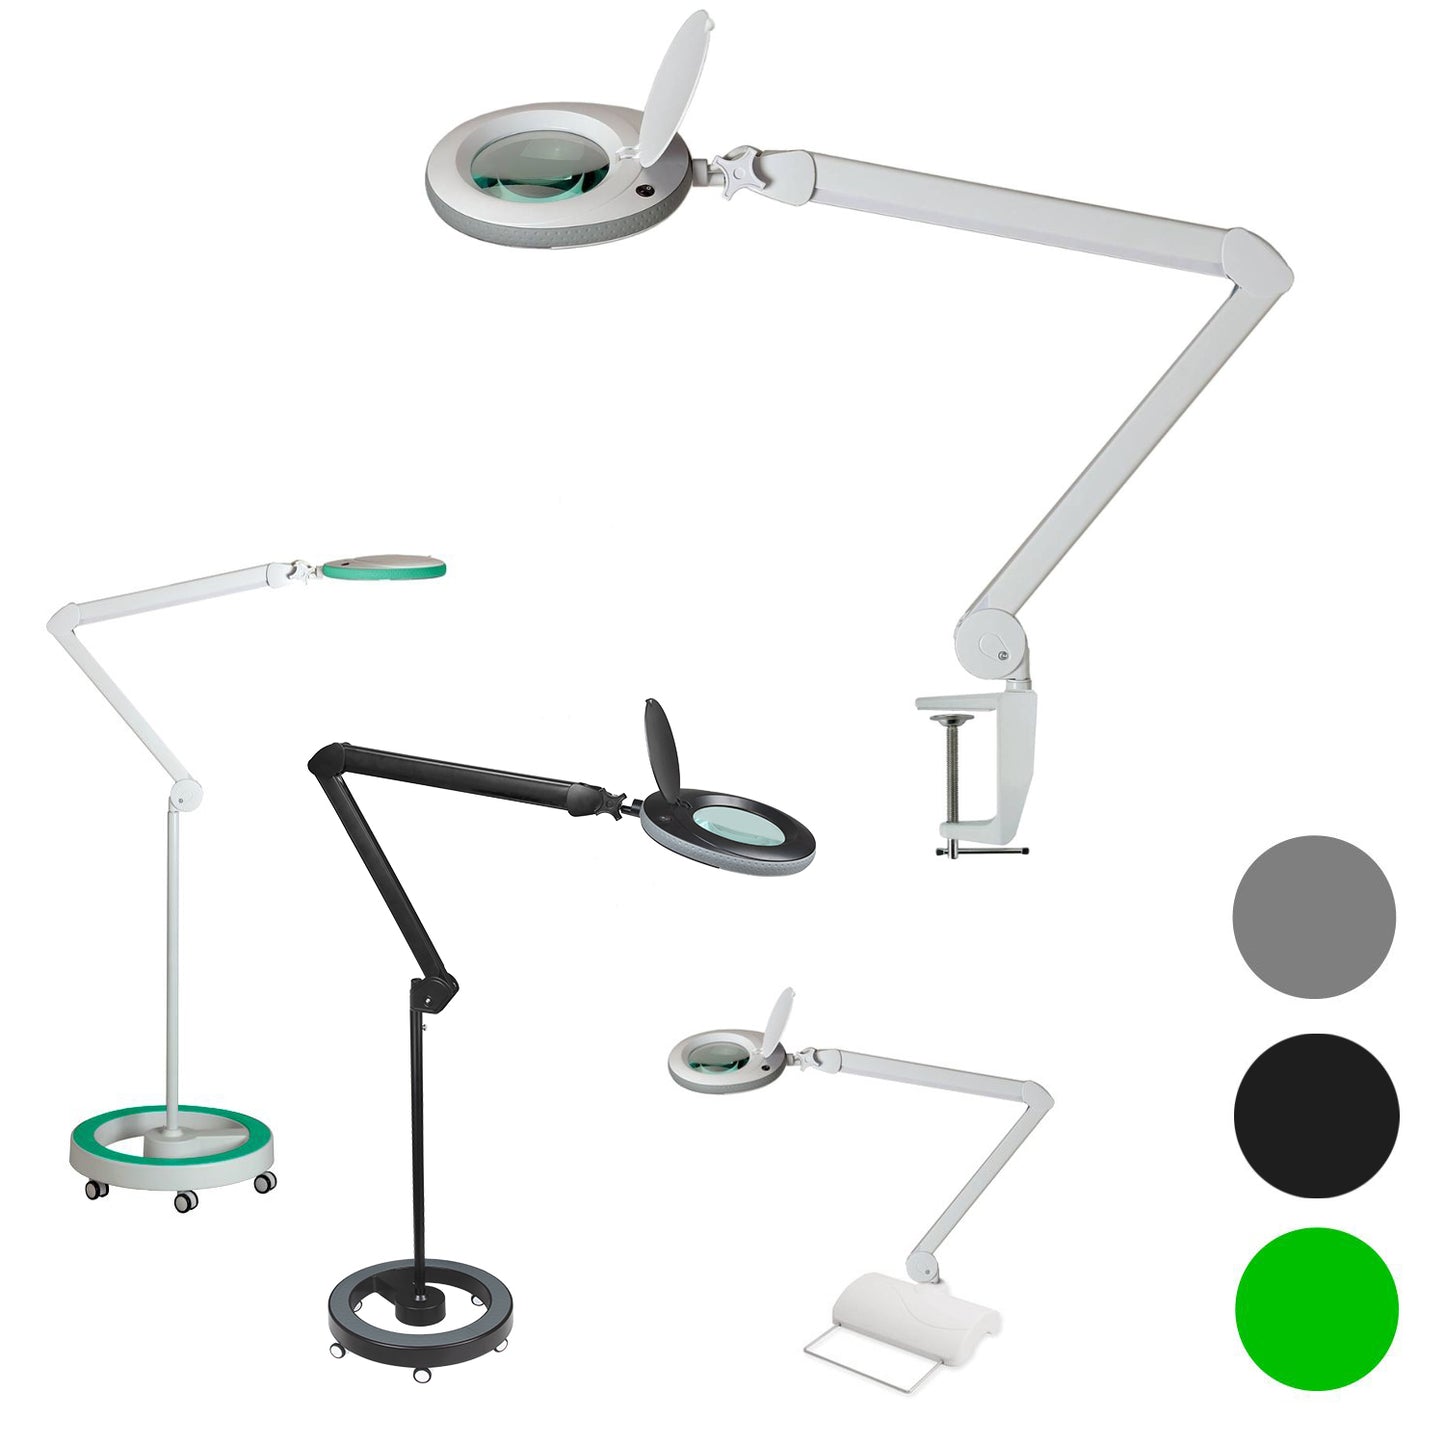 Lumeno 7213/15/18GR Magnifying lamp/workplace lamp 96 LEDs, coloured rubber protection